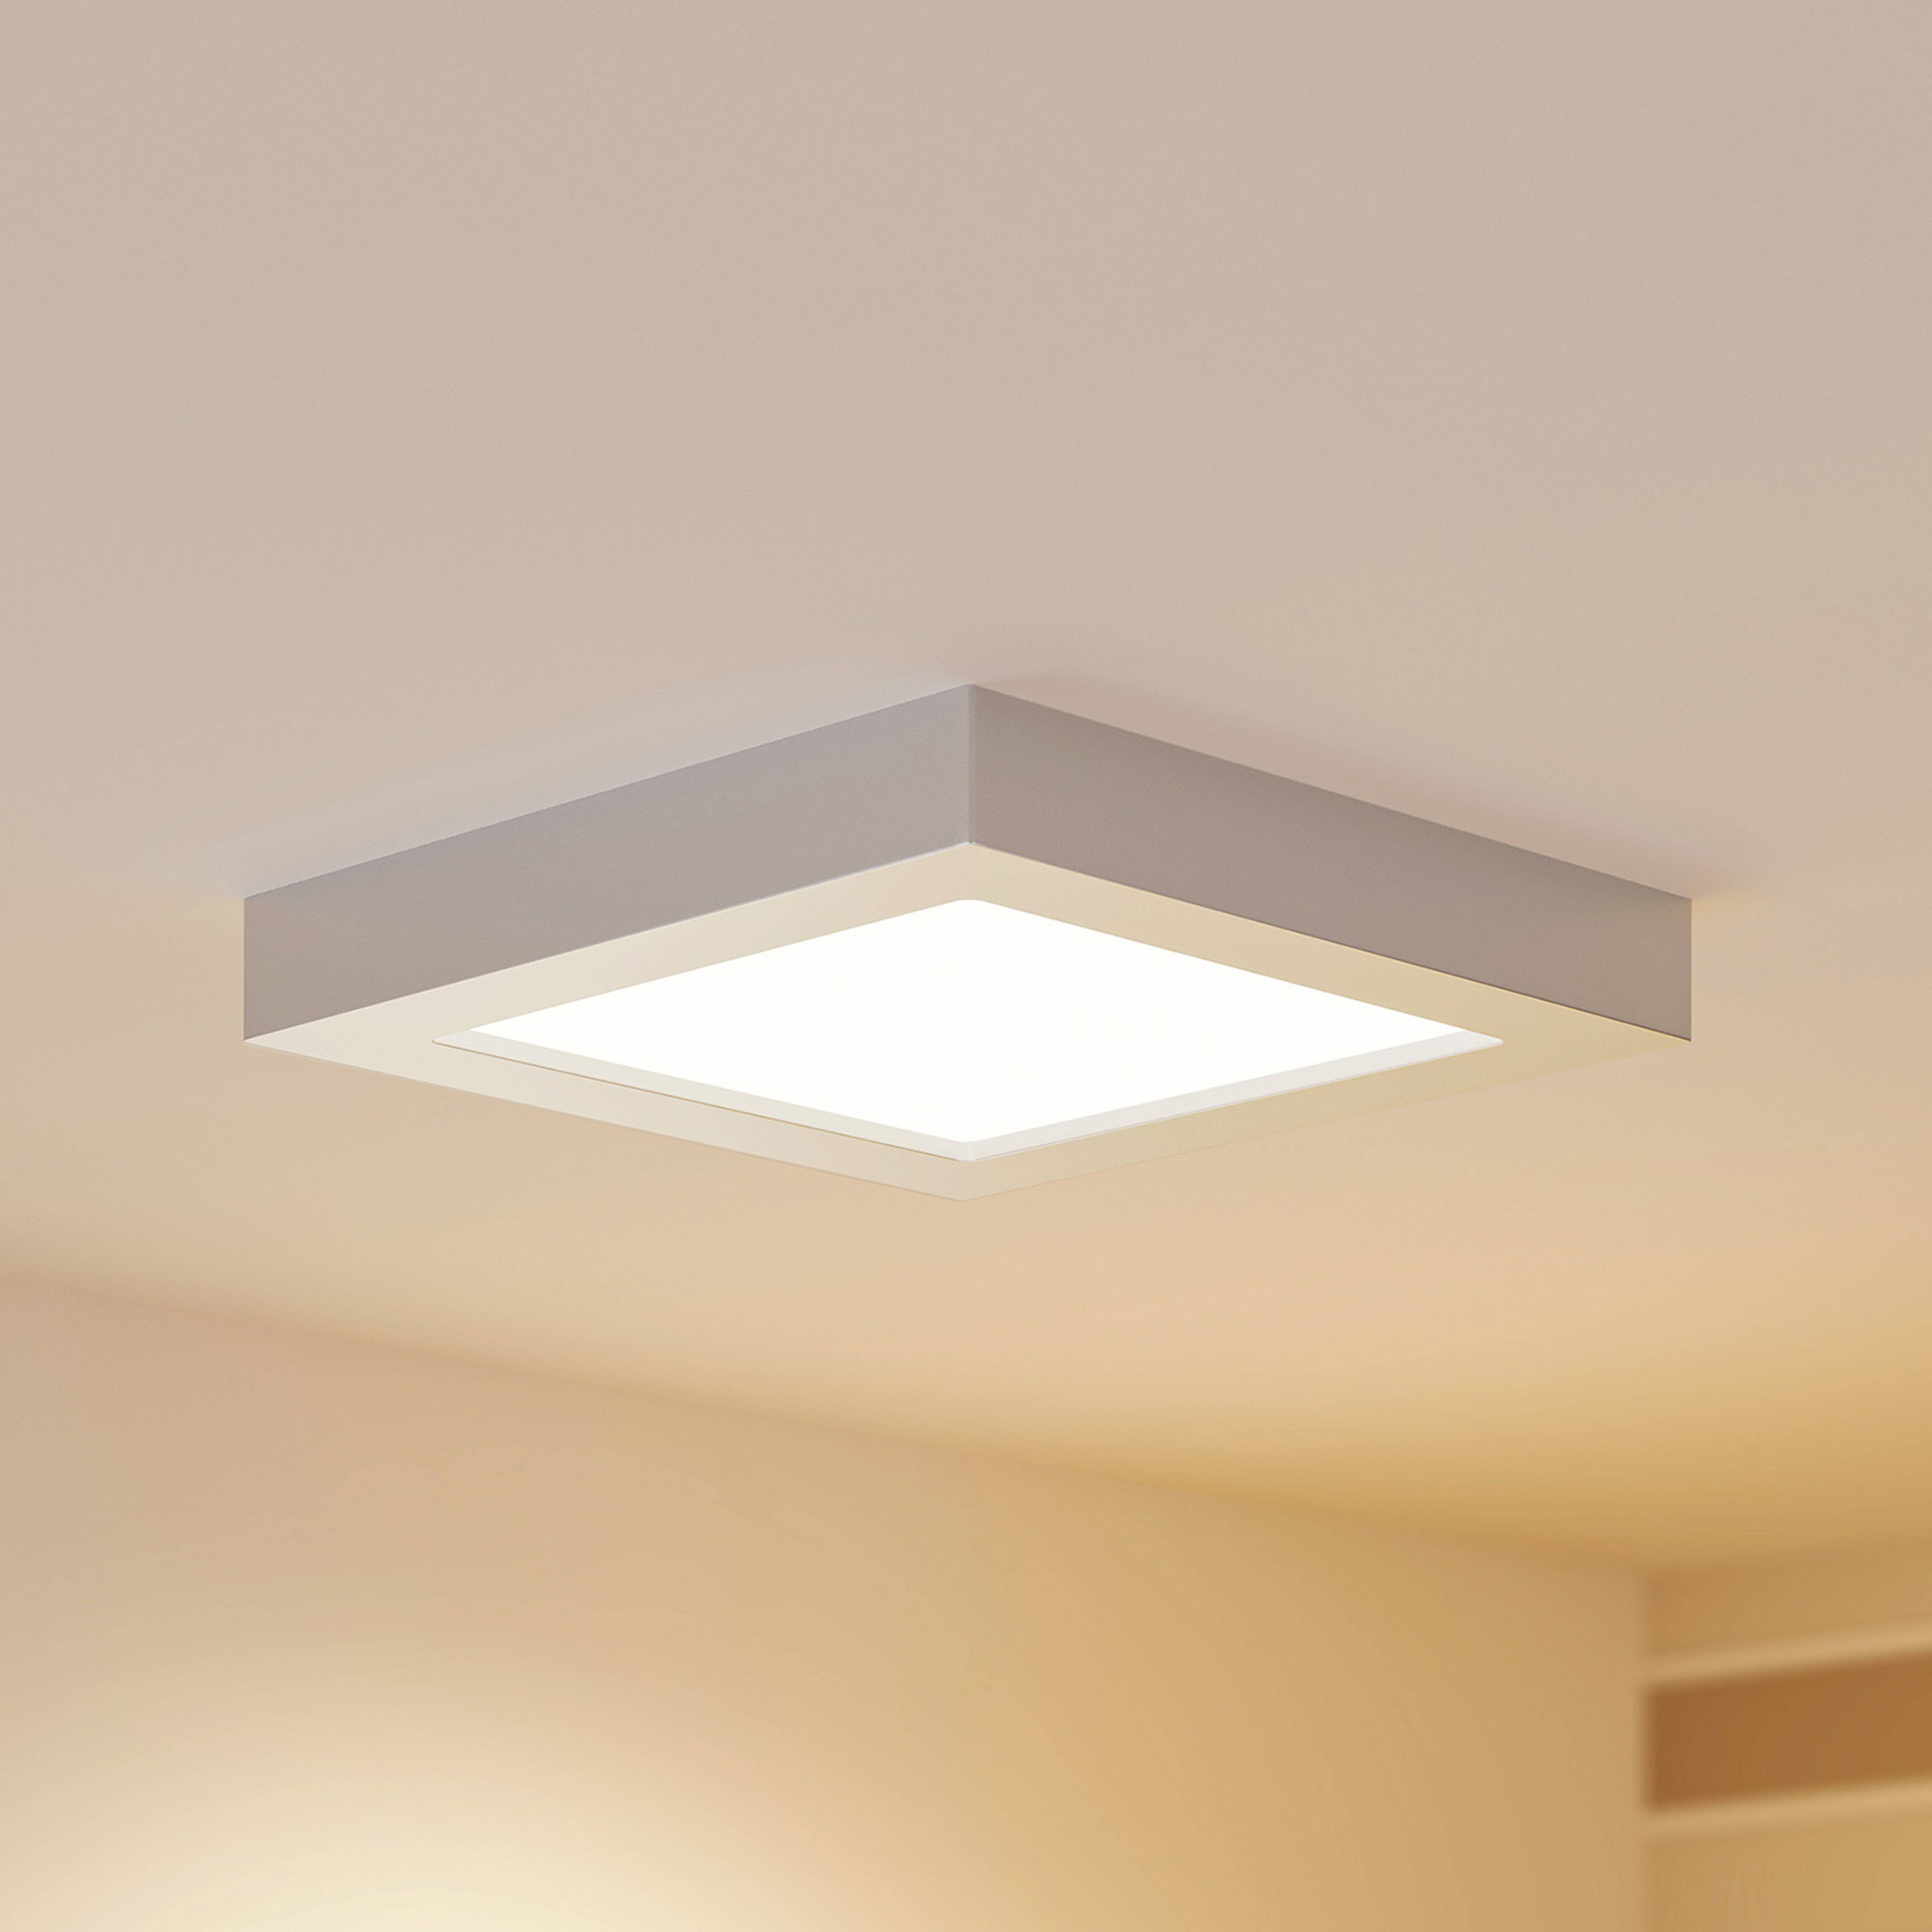 Prios LED ceiling light Alette, silver, 22.7cm, 18W, dimmable